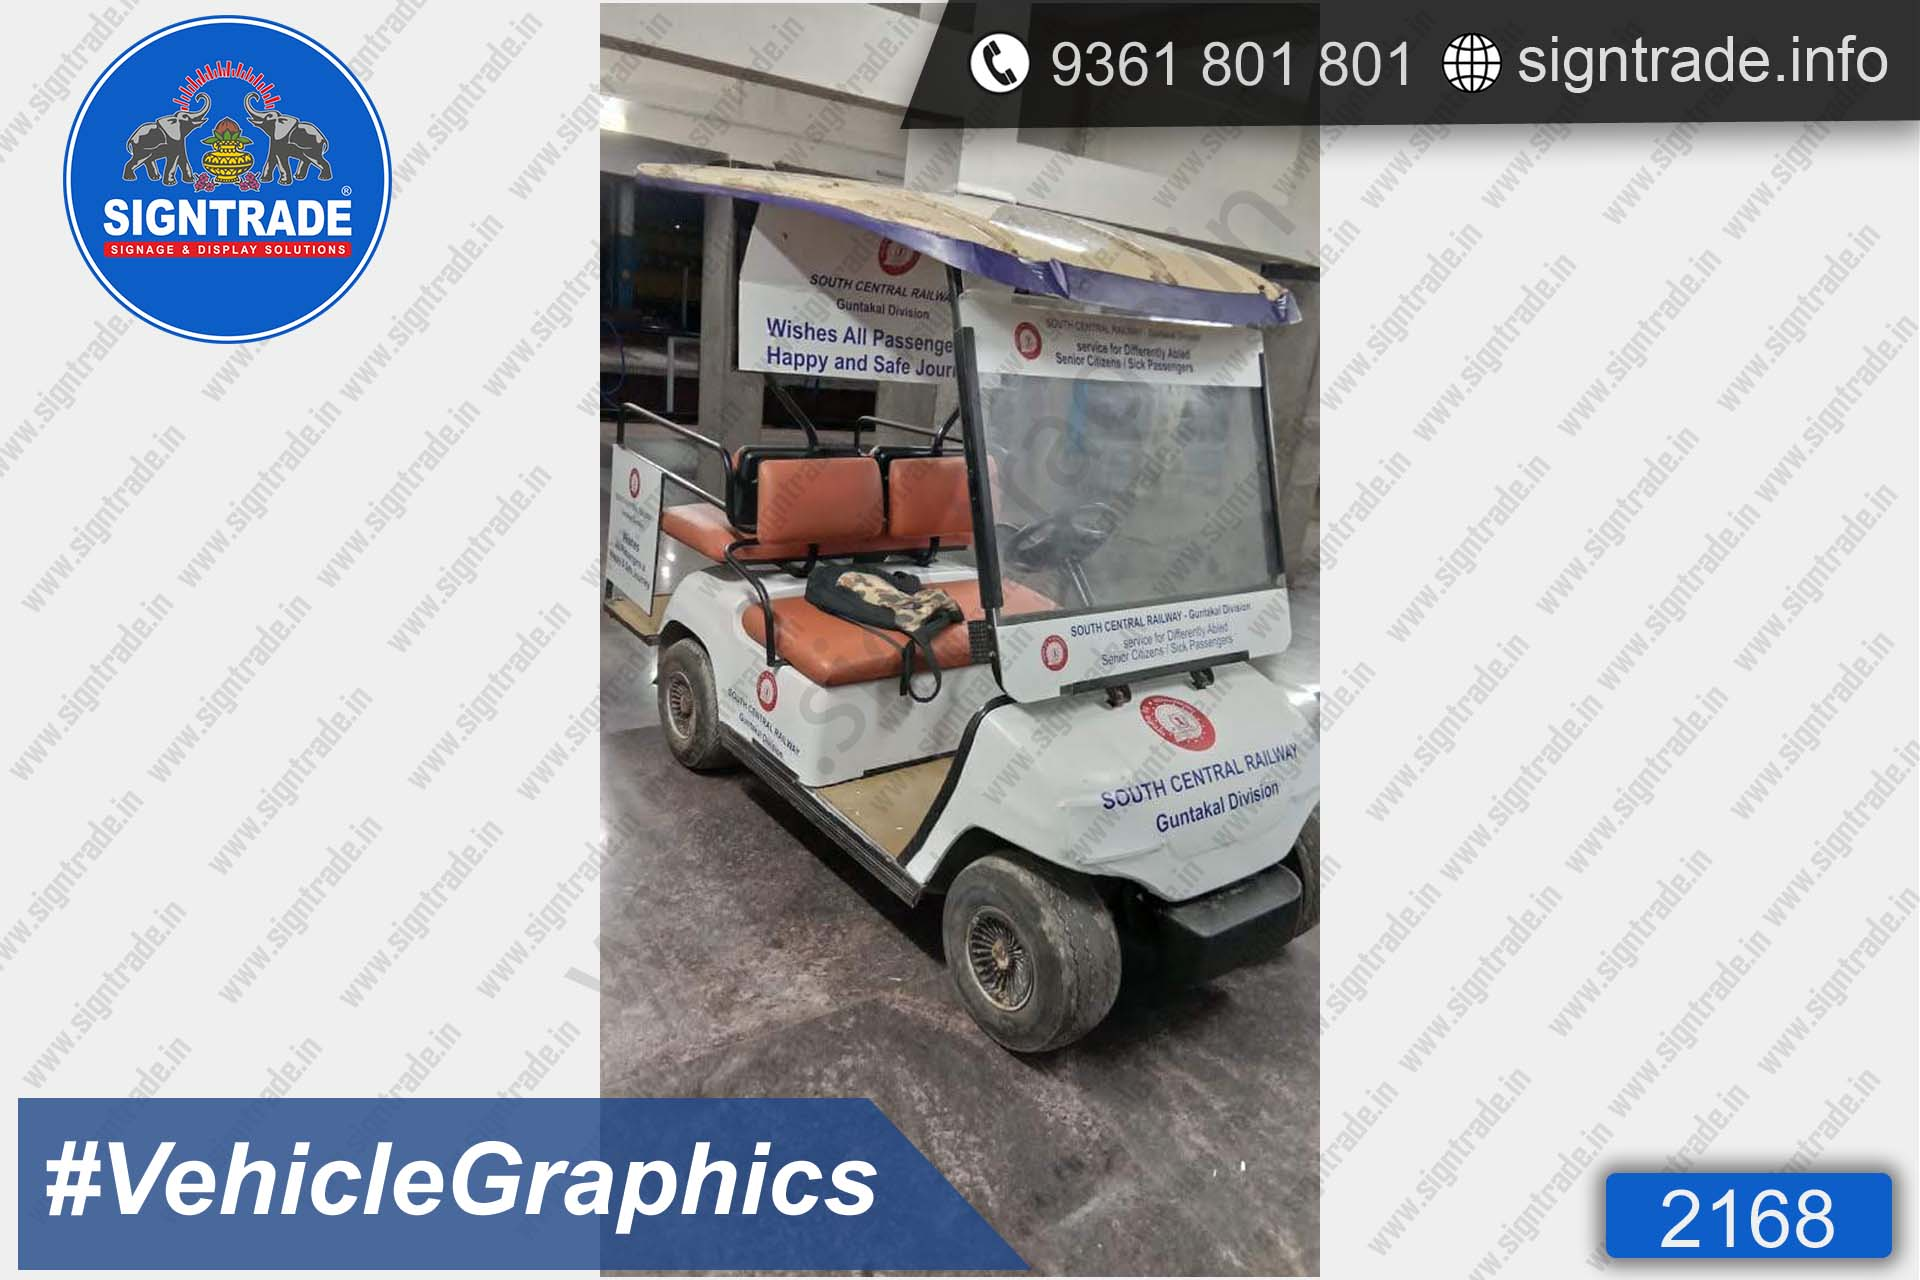 South Central Railway Vehicle Graphics